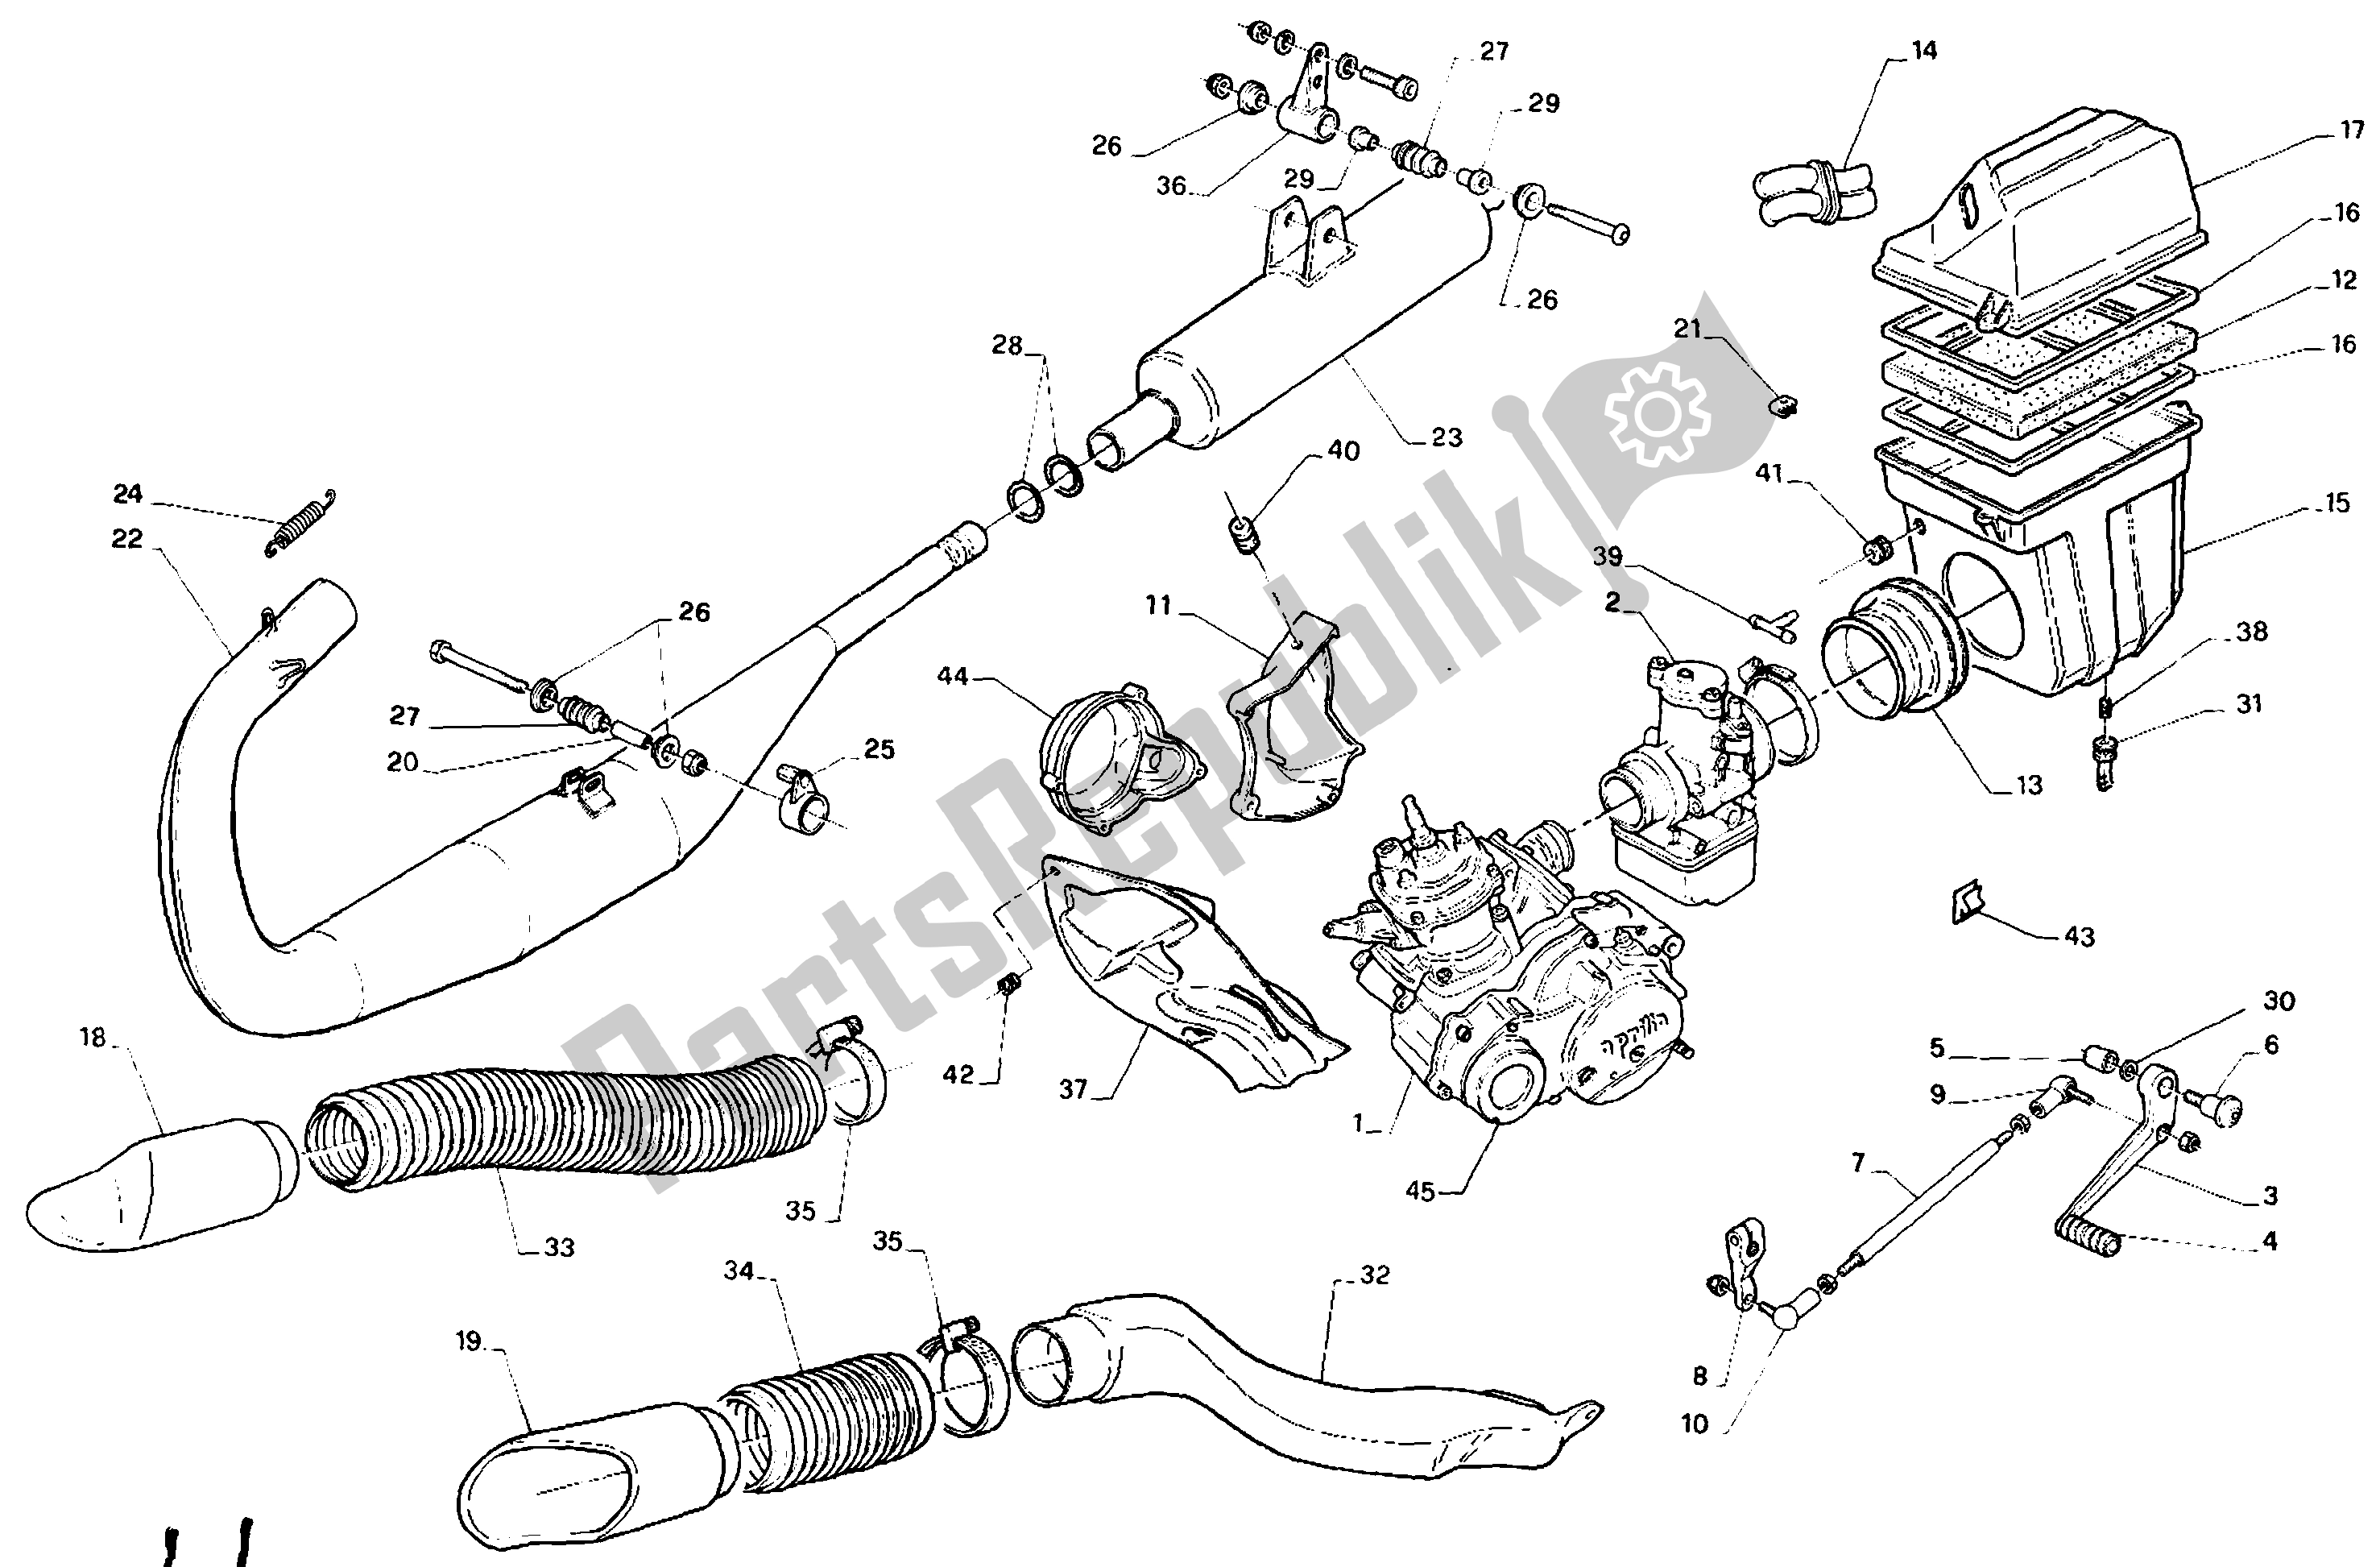 All parts for the Exhaust Assembly of the Aprilia AF1 125 1990 - 1992